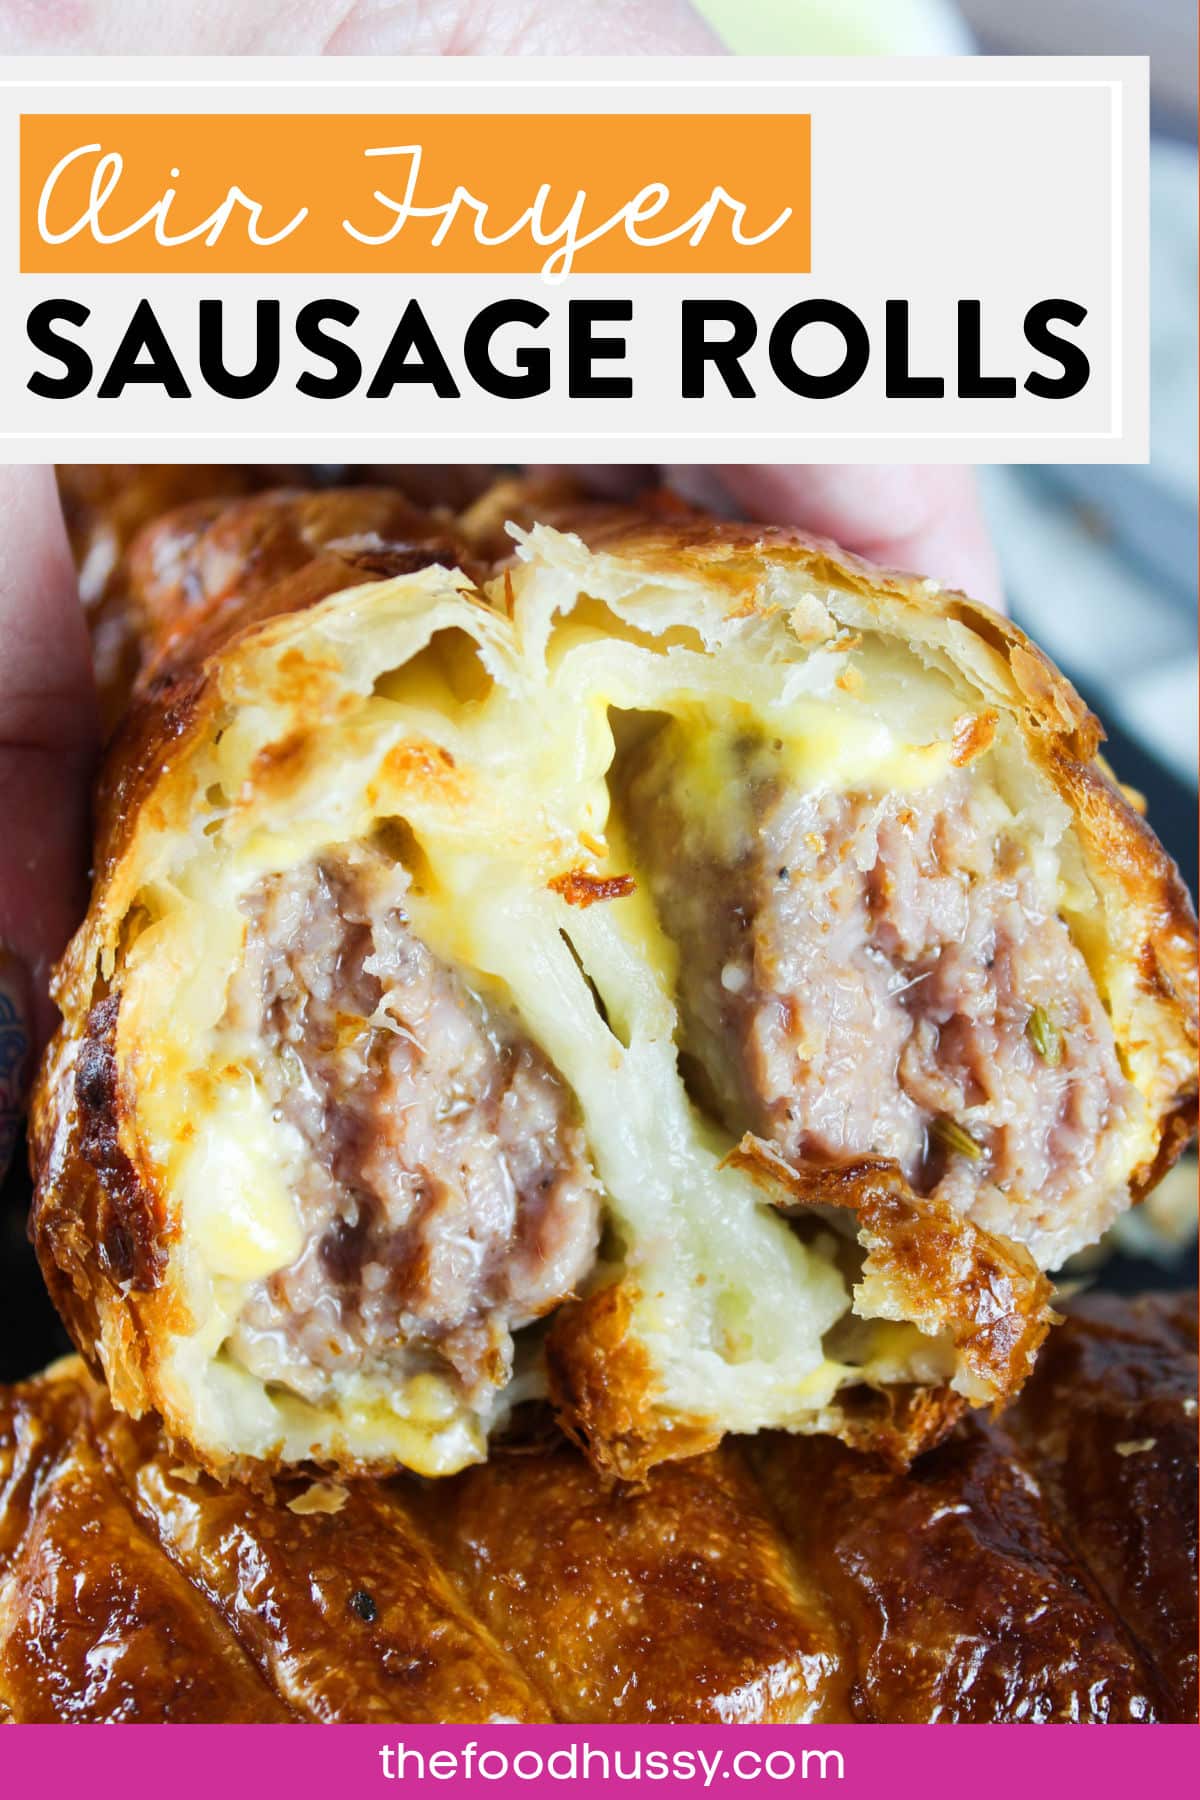 Air Fryer Sausage Rolls are delicious as a meal or a snack! Super flaky puff pastry filled with Italian sausage and wrapped tightly - then dipped in a zesty garlic mustard dipping sauce! Yum! via @foodhussy